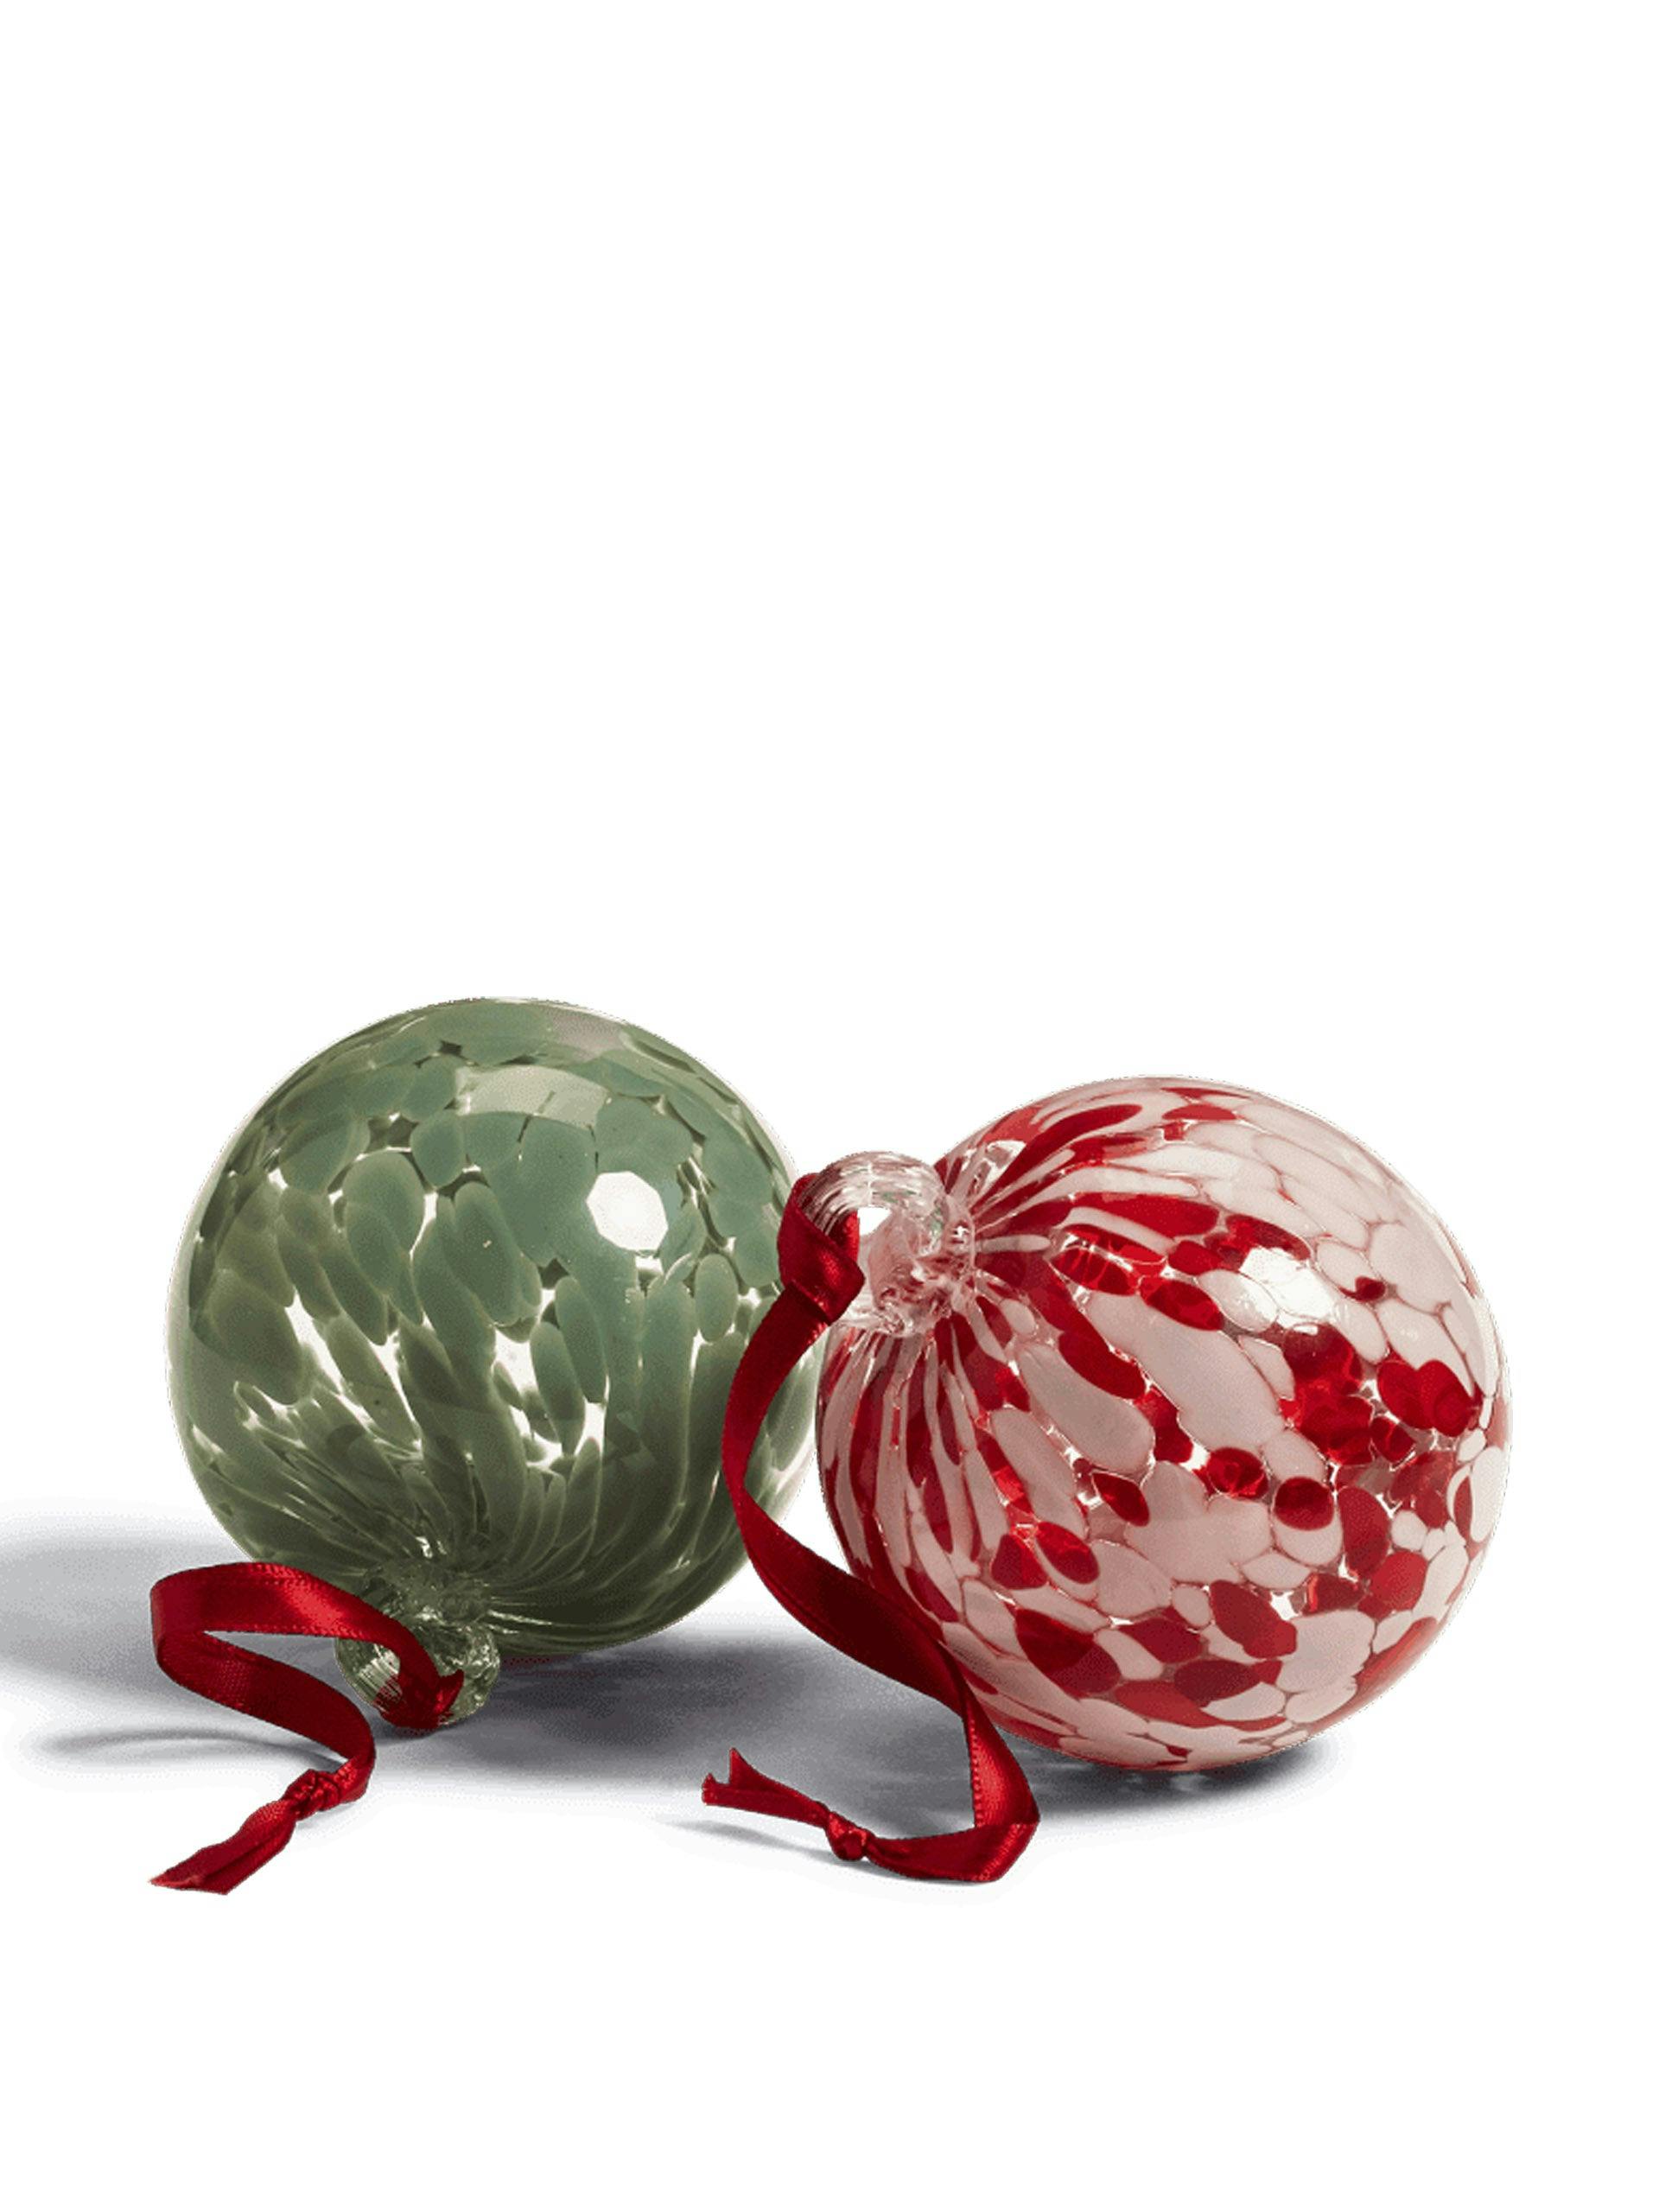 Sumi glass red and green bauble tree decorations (set of 2)